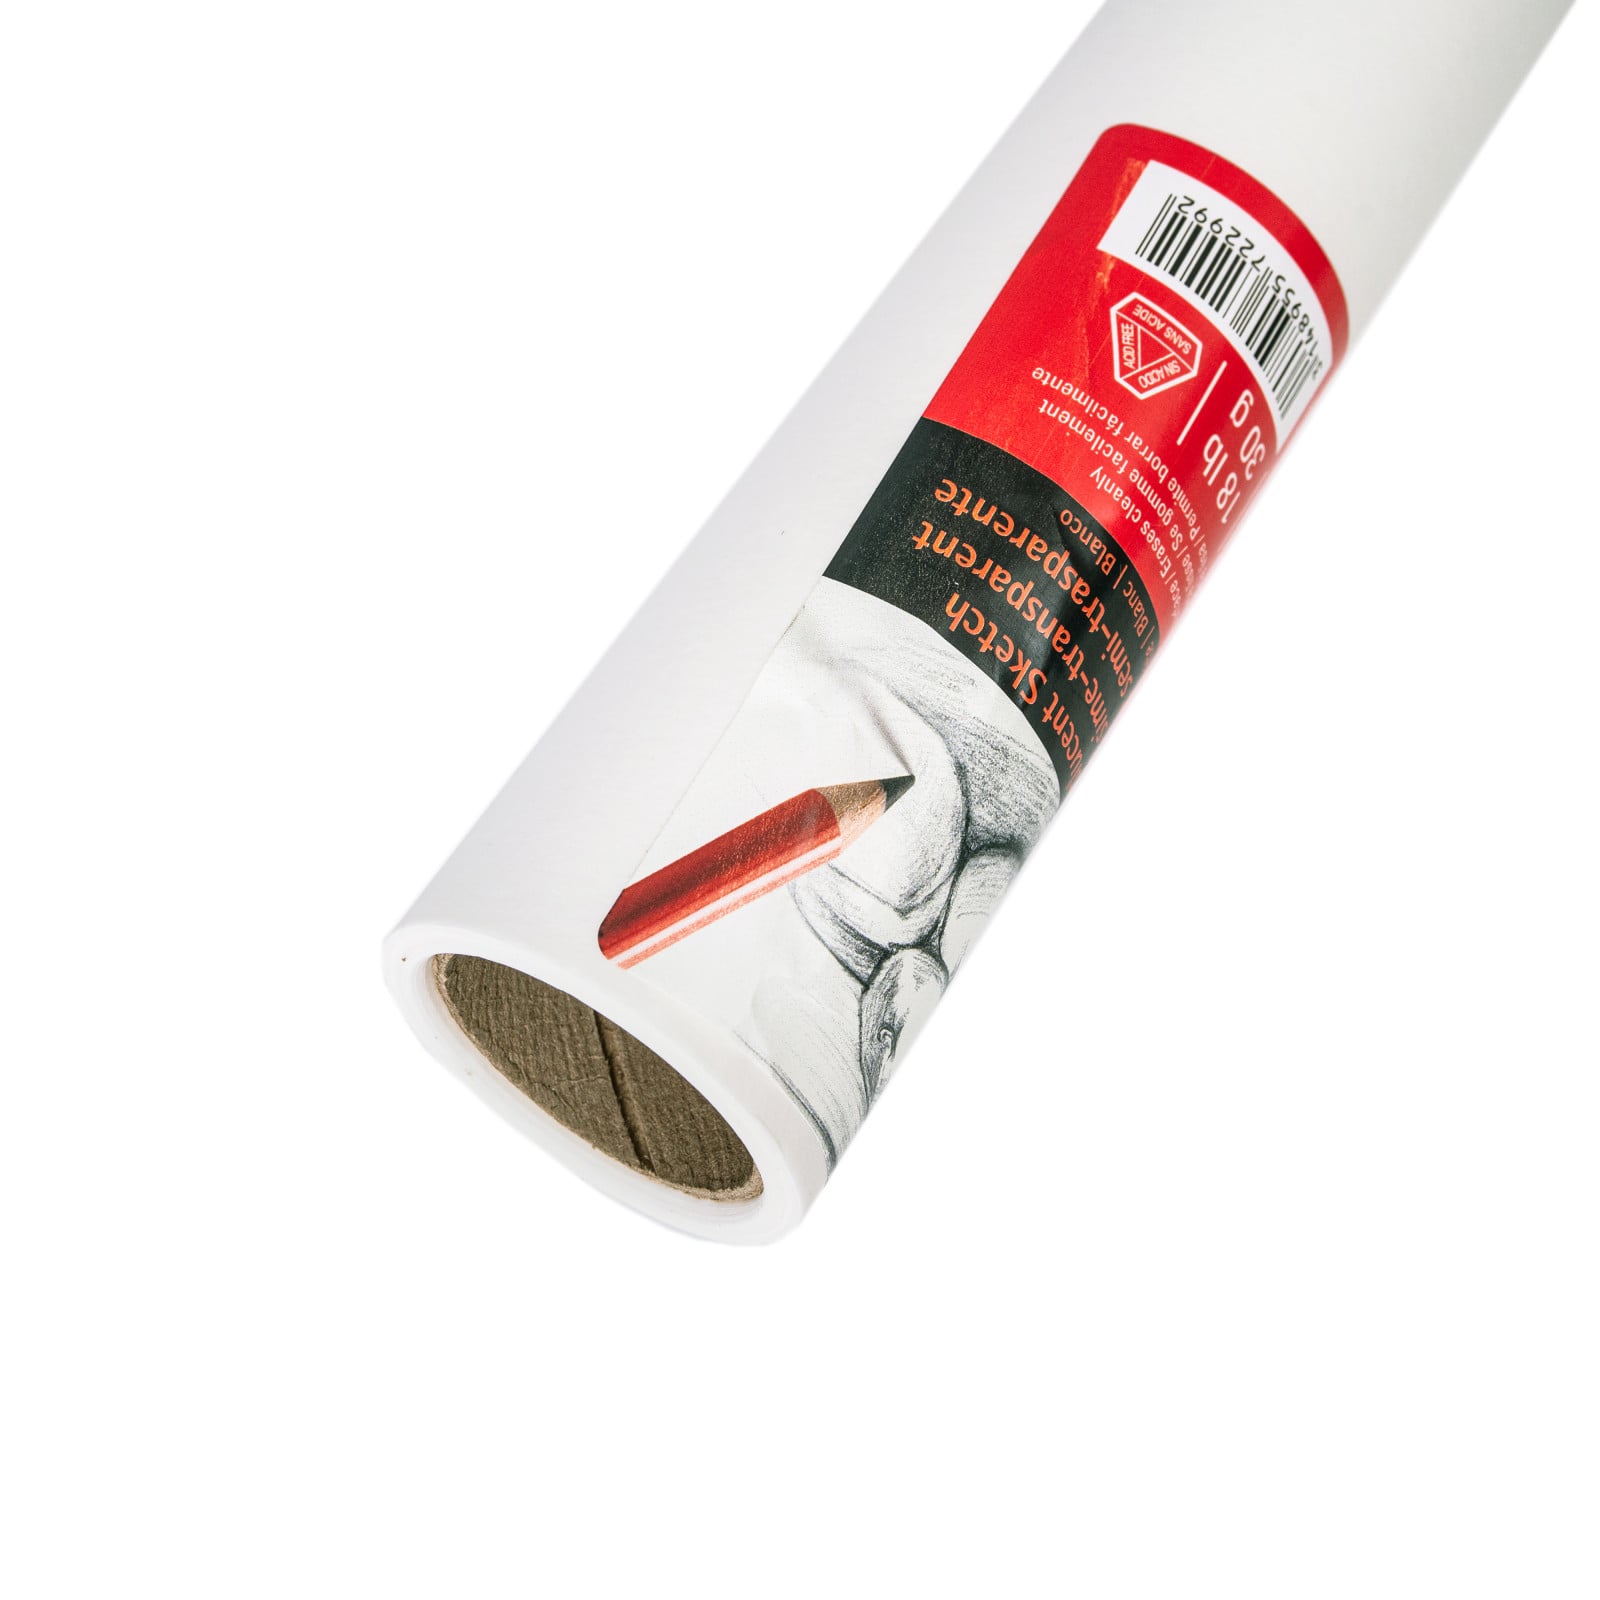 Blick Studio Tracing Paper Roll - 24 x 50 yds, White